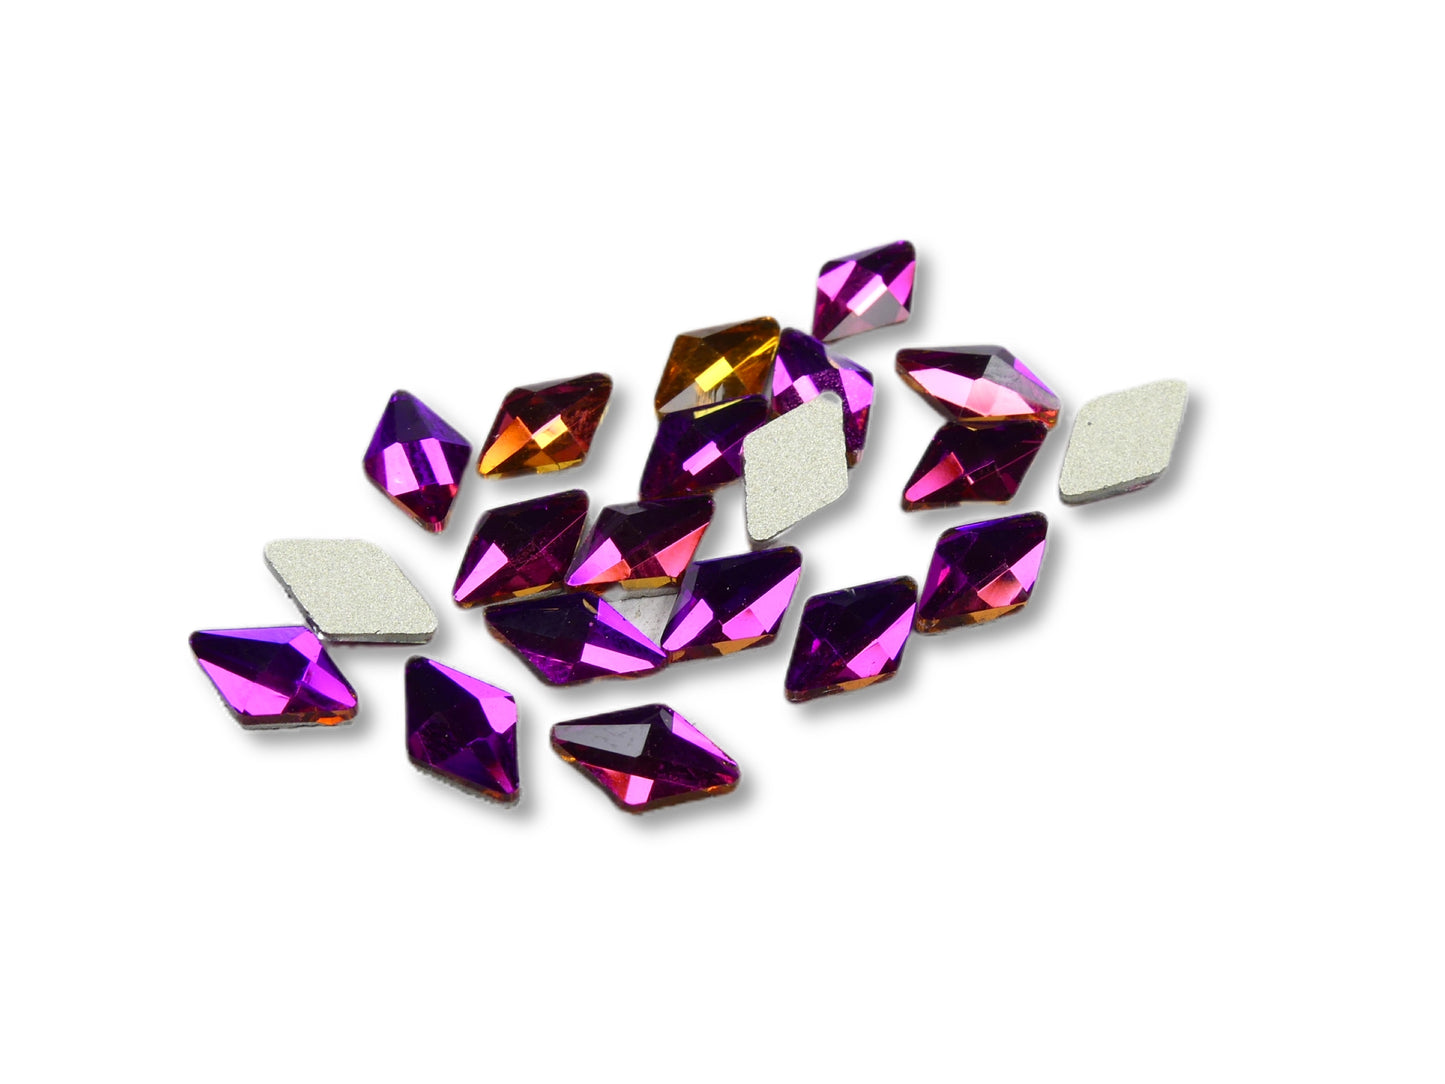 Load image into Gallery viewer, Crystals - Diamond - 20ct - My Little Nail Art Shop
